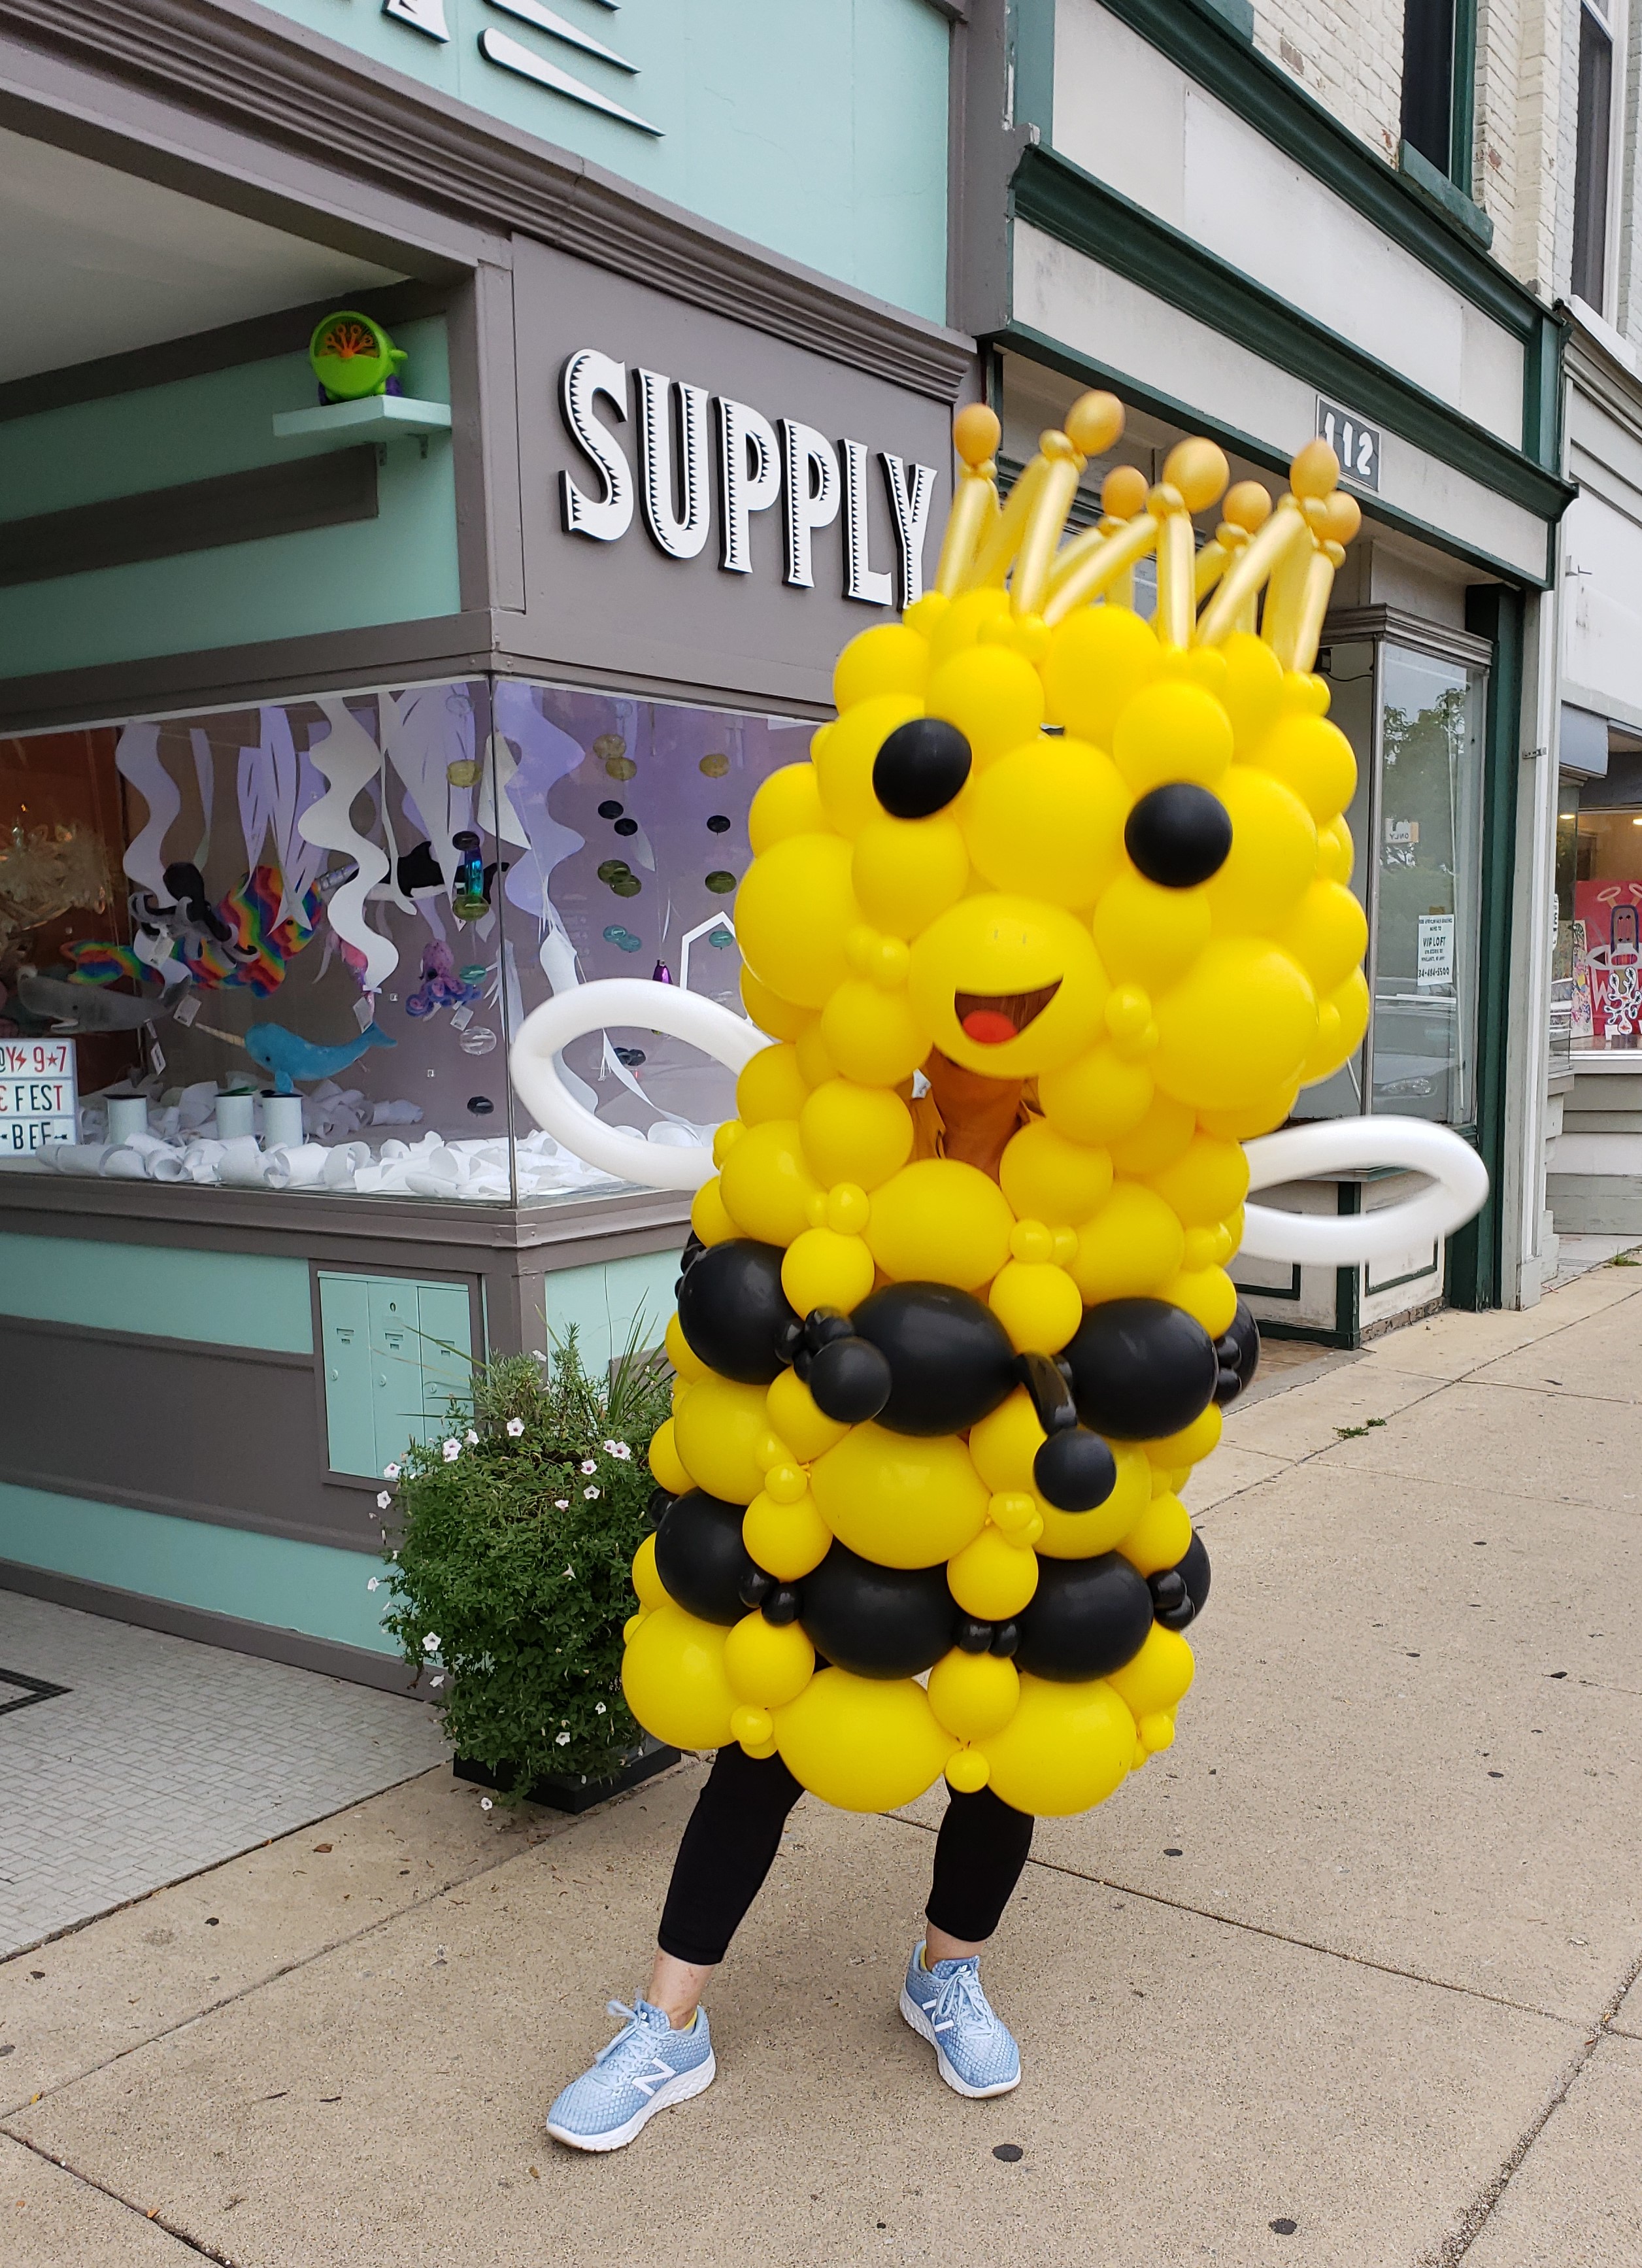 A person wears the Queen Bizzy Bee costume, a yellow and black balloon sculpture of a smiling queen honeybee.